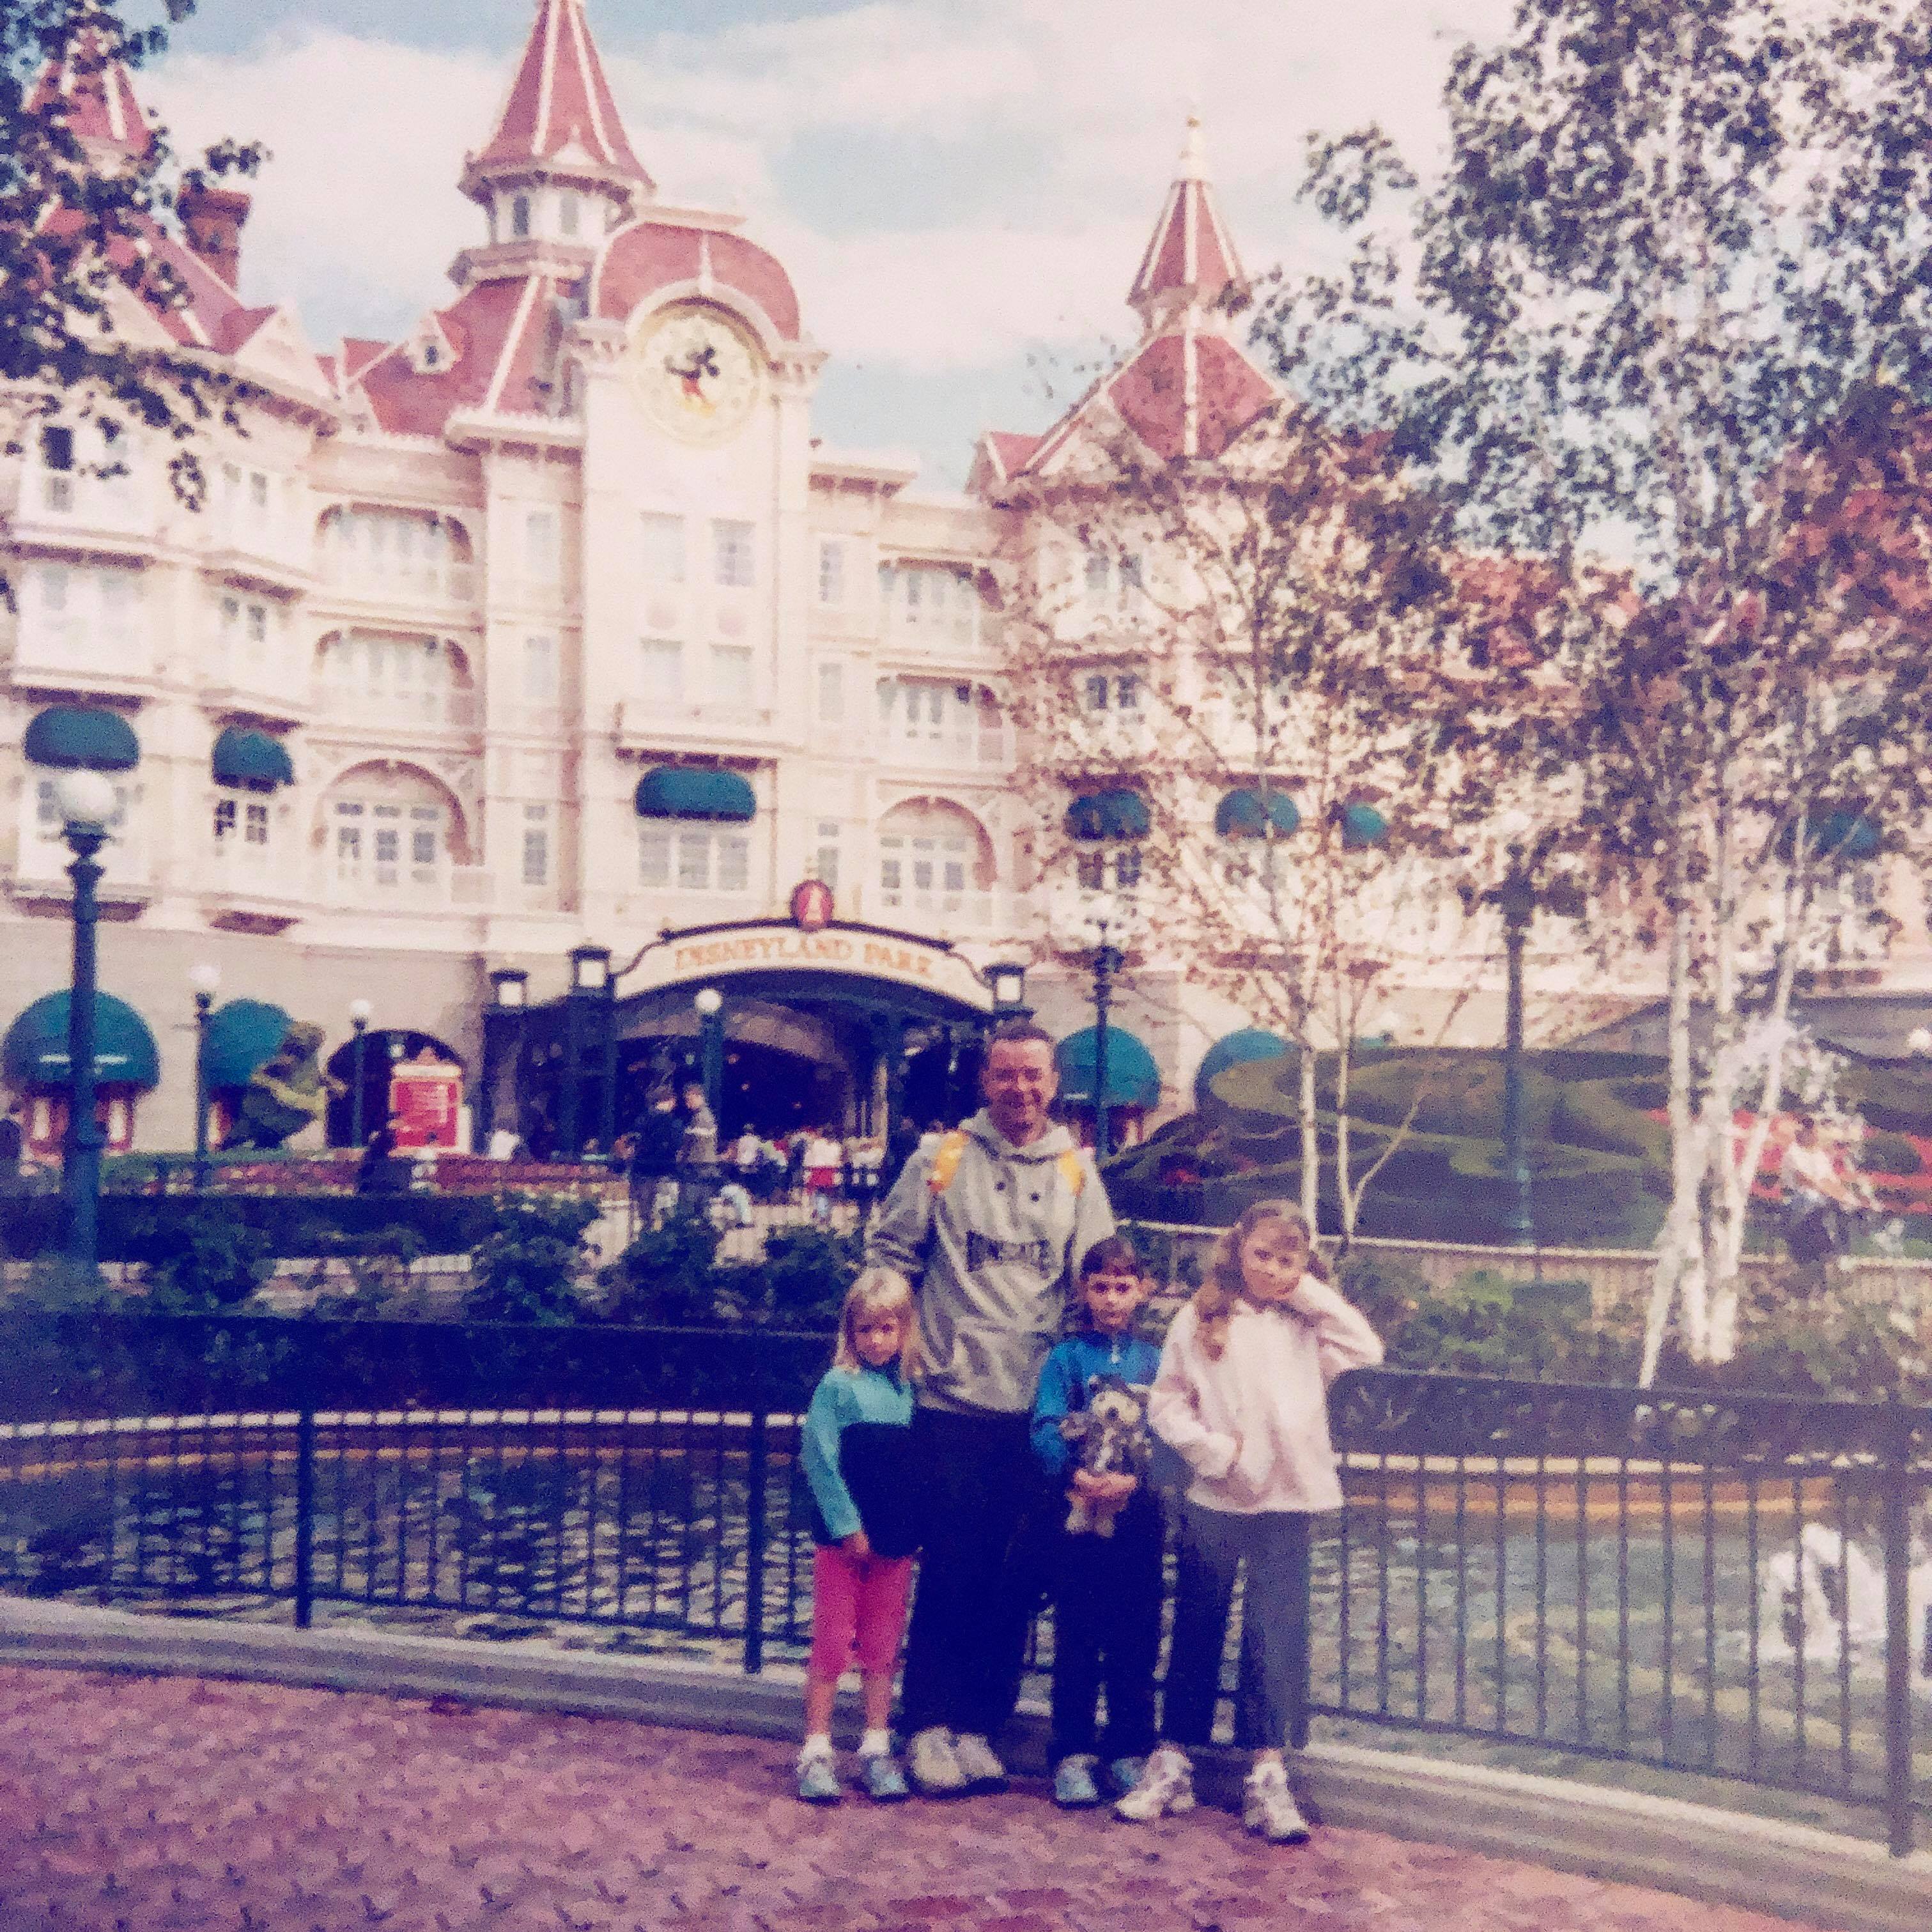 Old family photo of 3 young girls and their dad at Disneyland Paris in front of the Disneyland Hotel